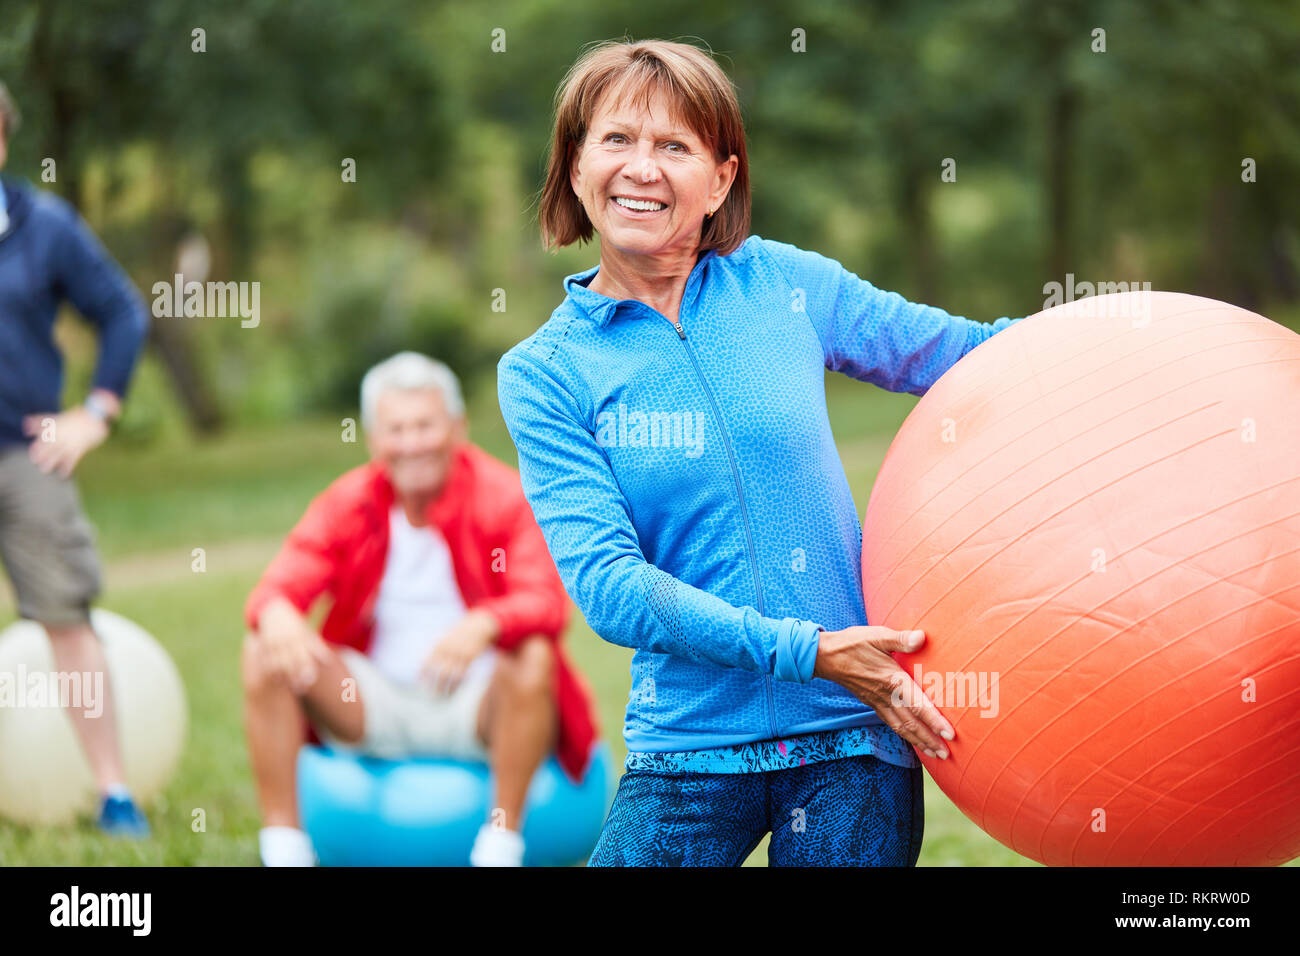 https://c8.alamy.com/comp/RKRW0D/woman-as-a-physiotherapist-with-gym-ball-in-front-of-seniors-in-her-rehab-course-RKRW0D.jpg